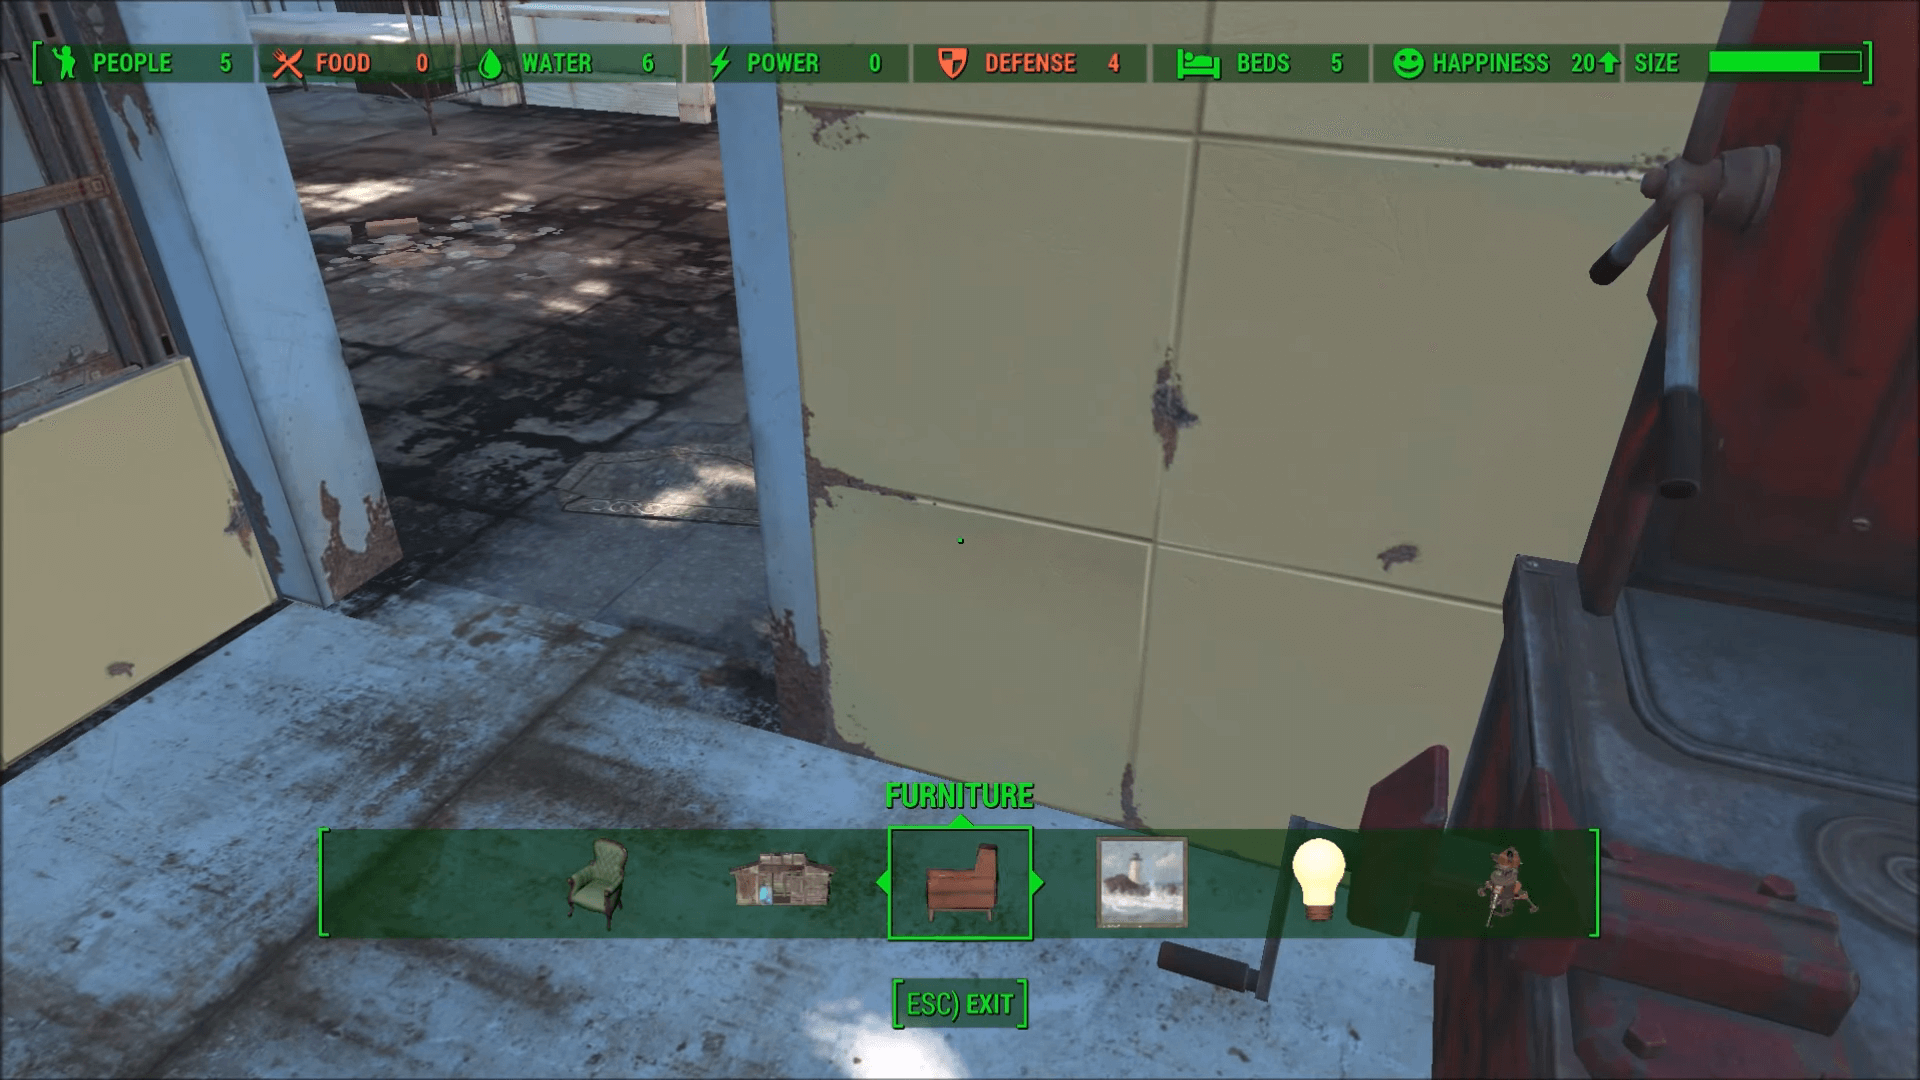 How To Wait In Fallout 4: A Complete Guide